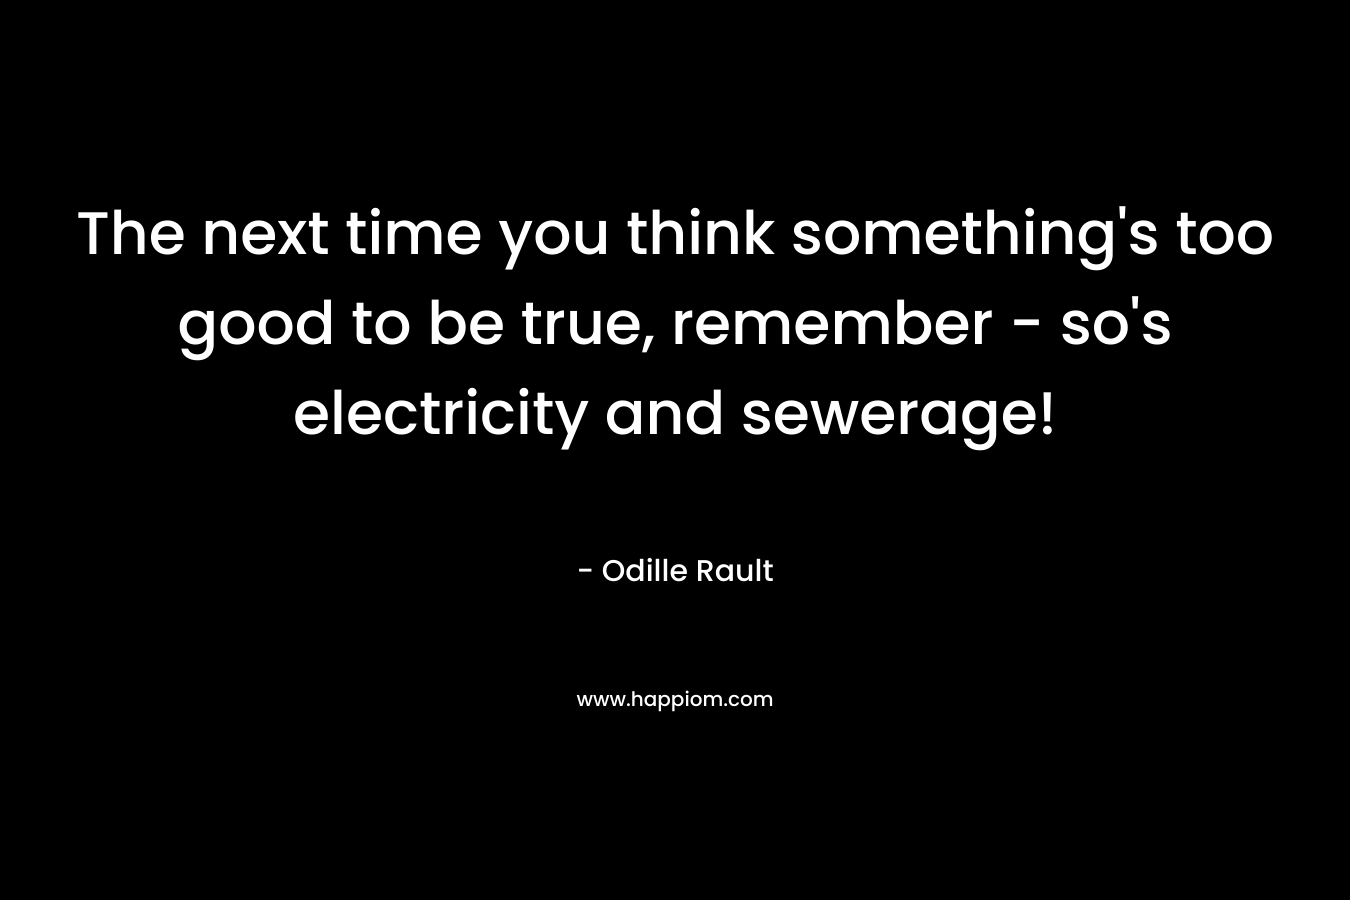 The next time you think something's too good to be true, remember - so's electricity and sewerage!